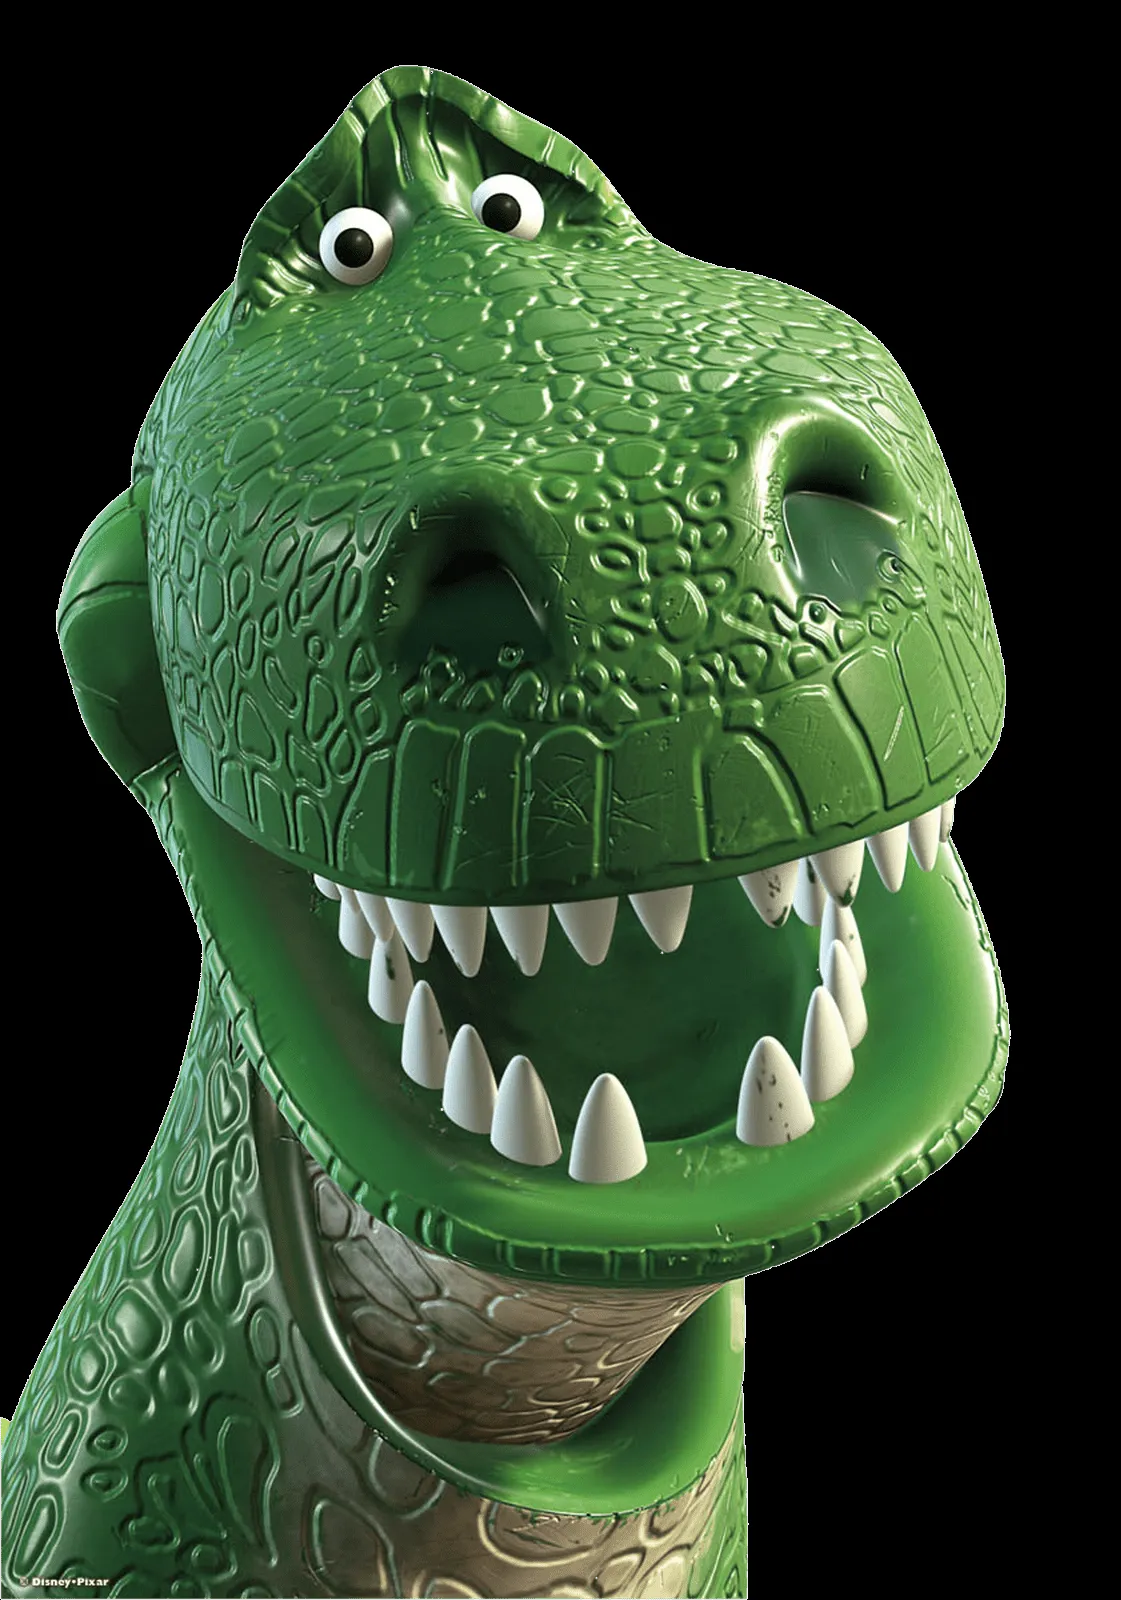 Toy Story Rex The Green Dinosaur Iphone 4 Wallpaper Pictures